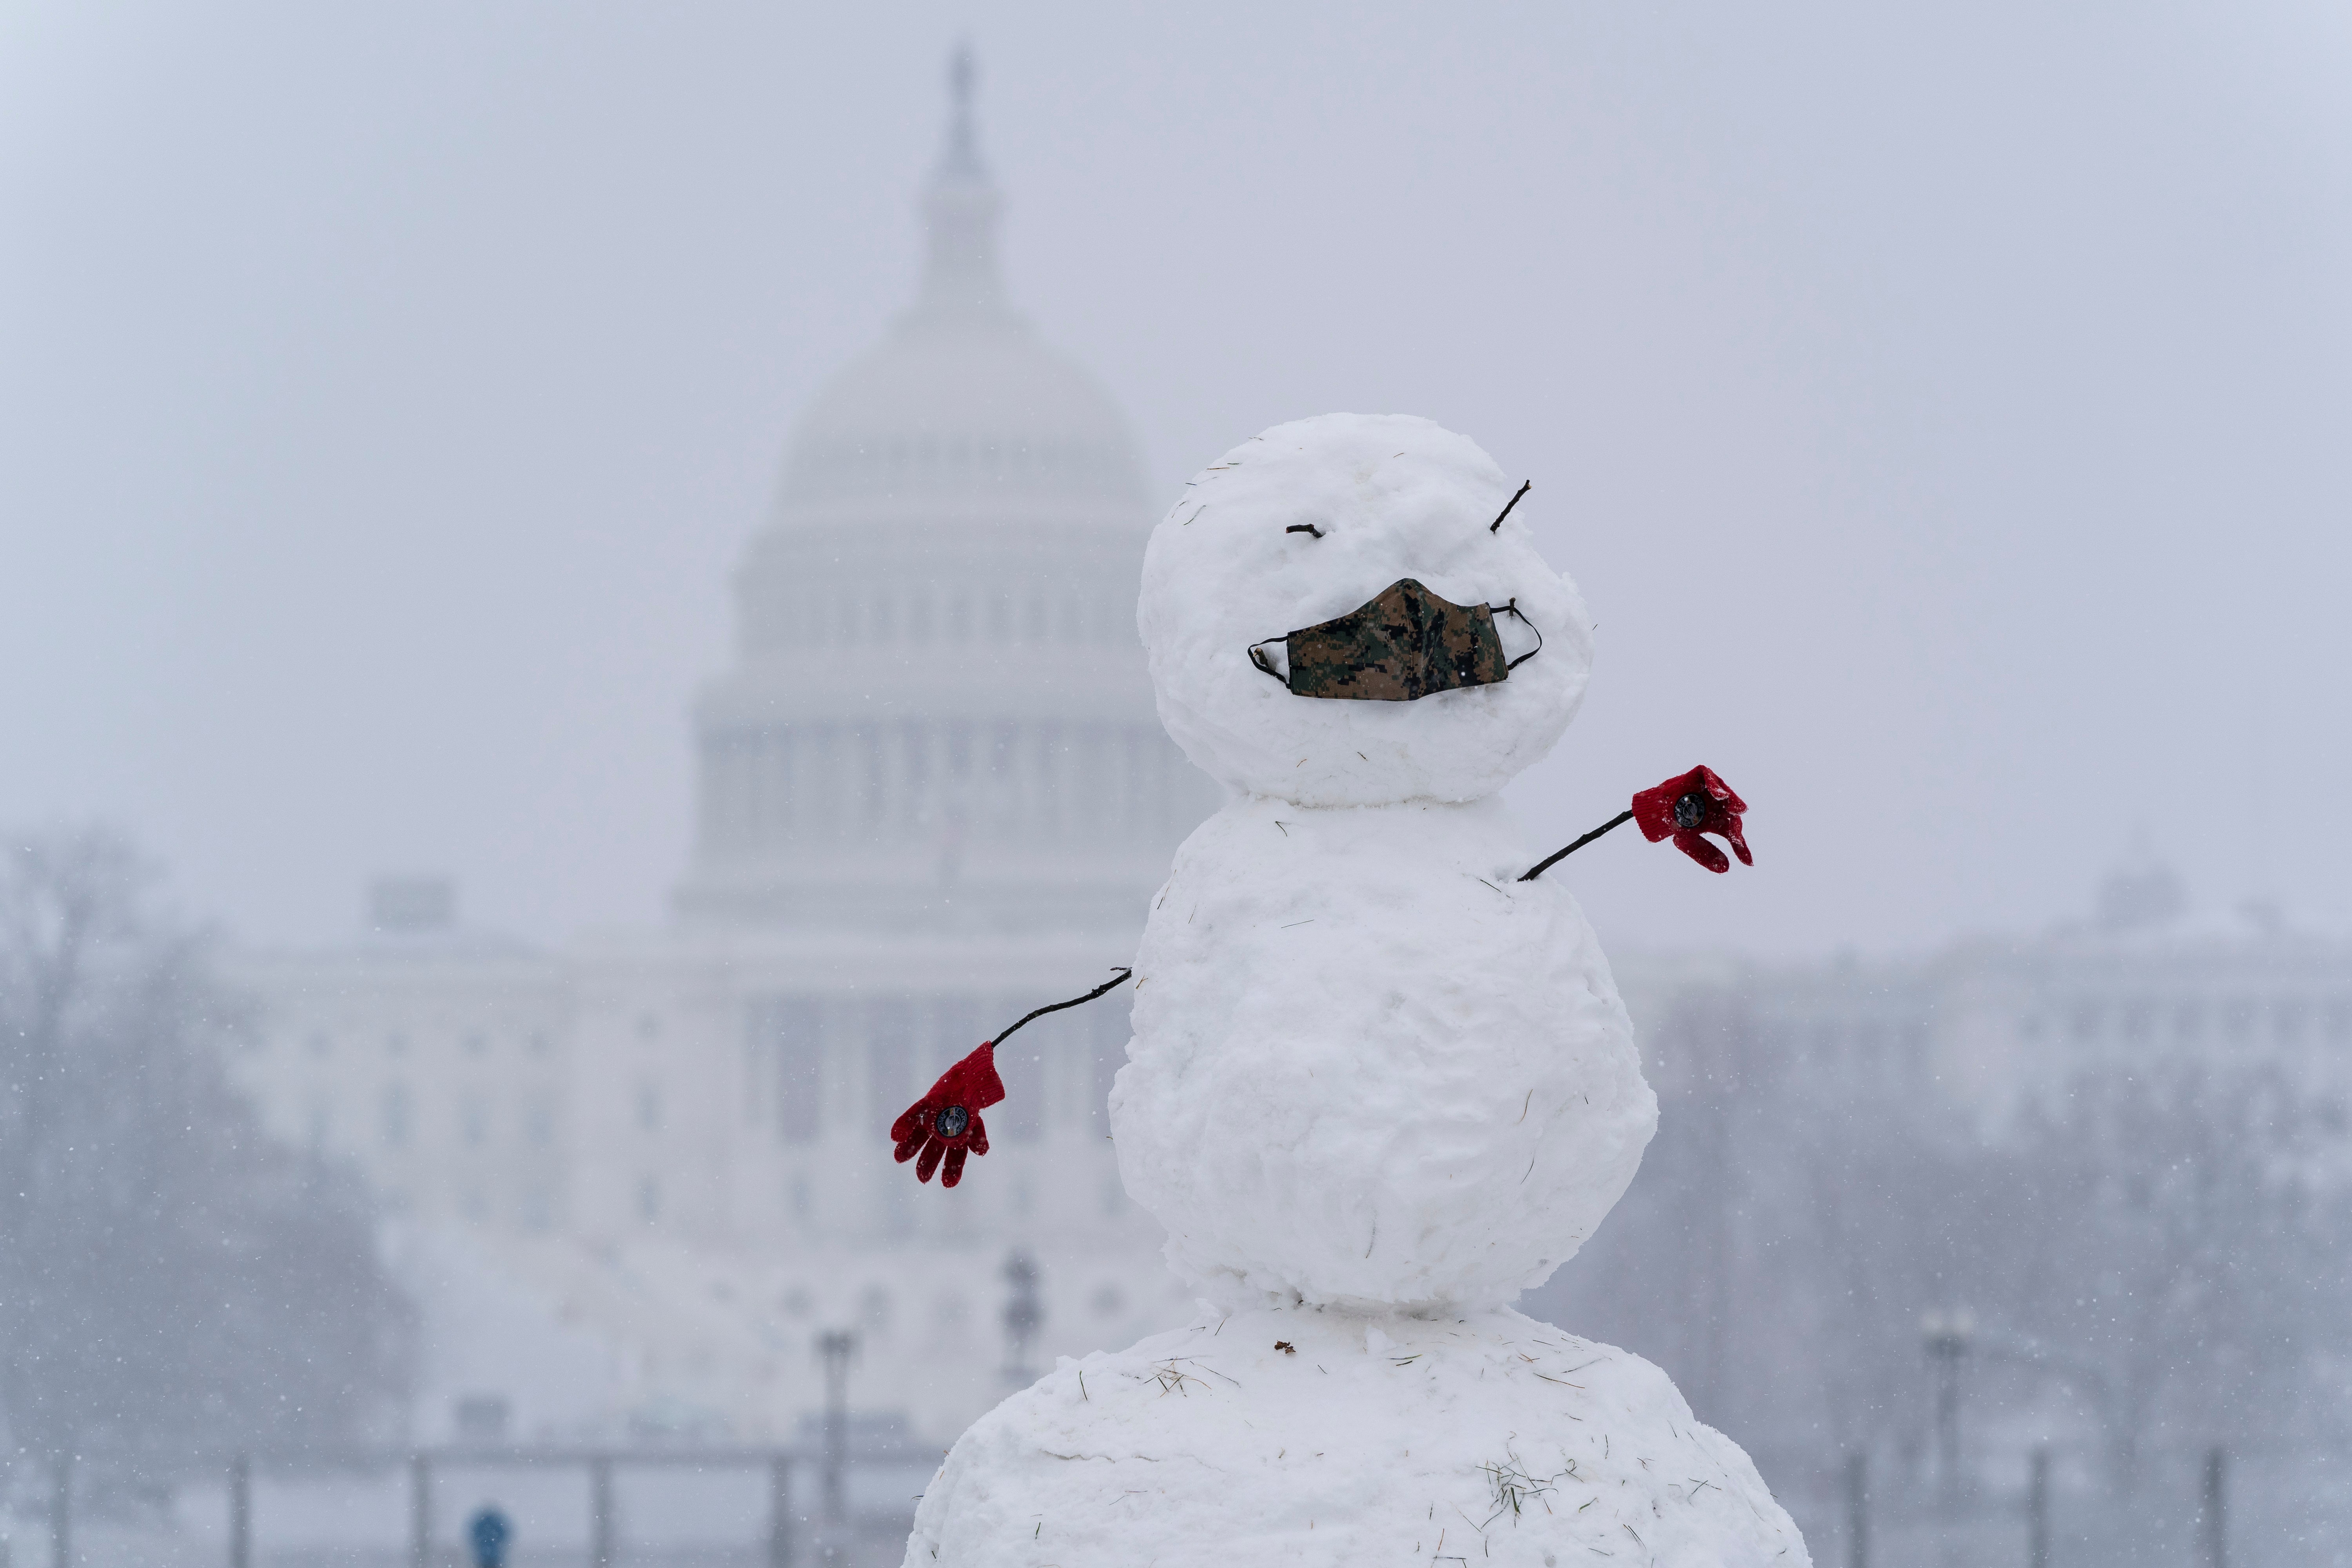 Senate confirmation vote for homeland security secretary postponed after DC gets 5 inches of snow